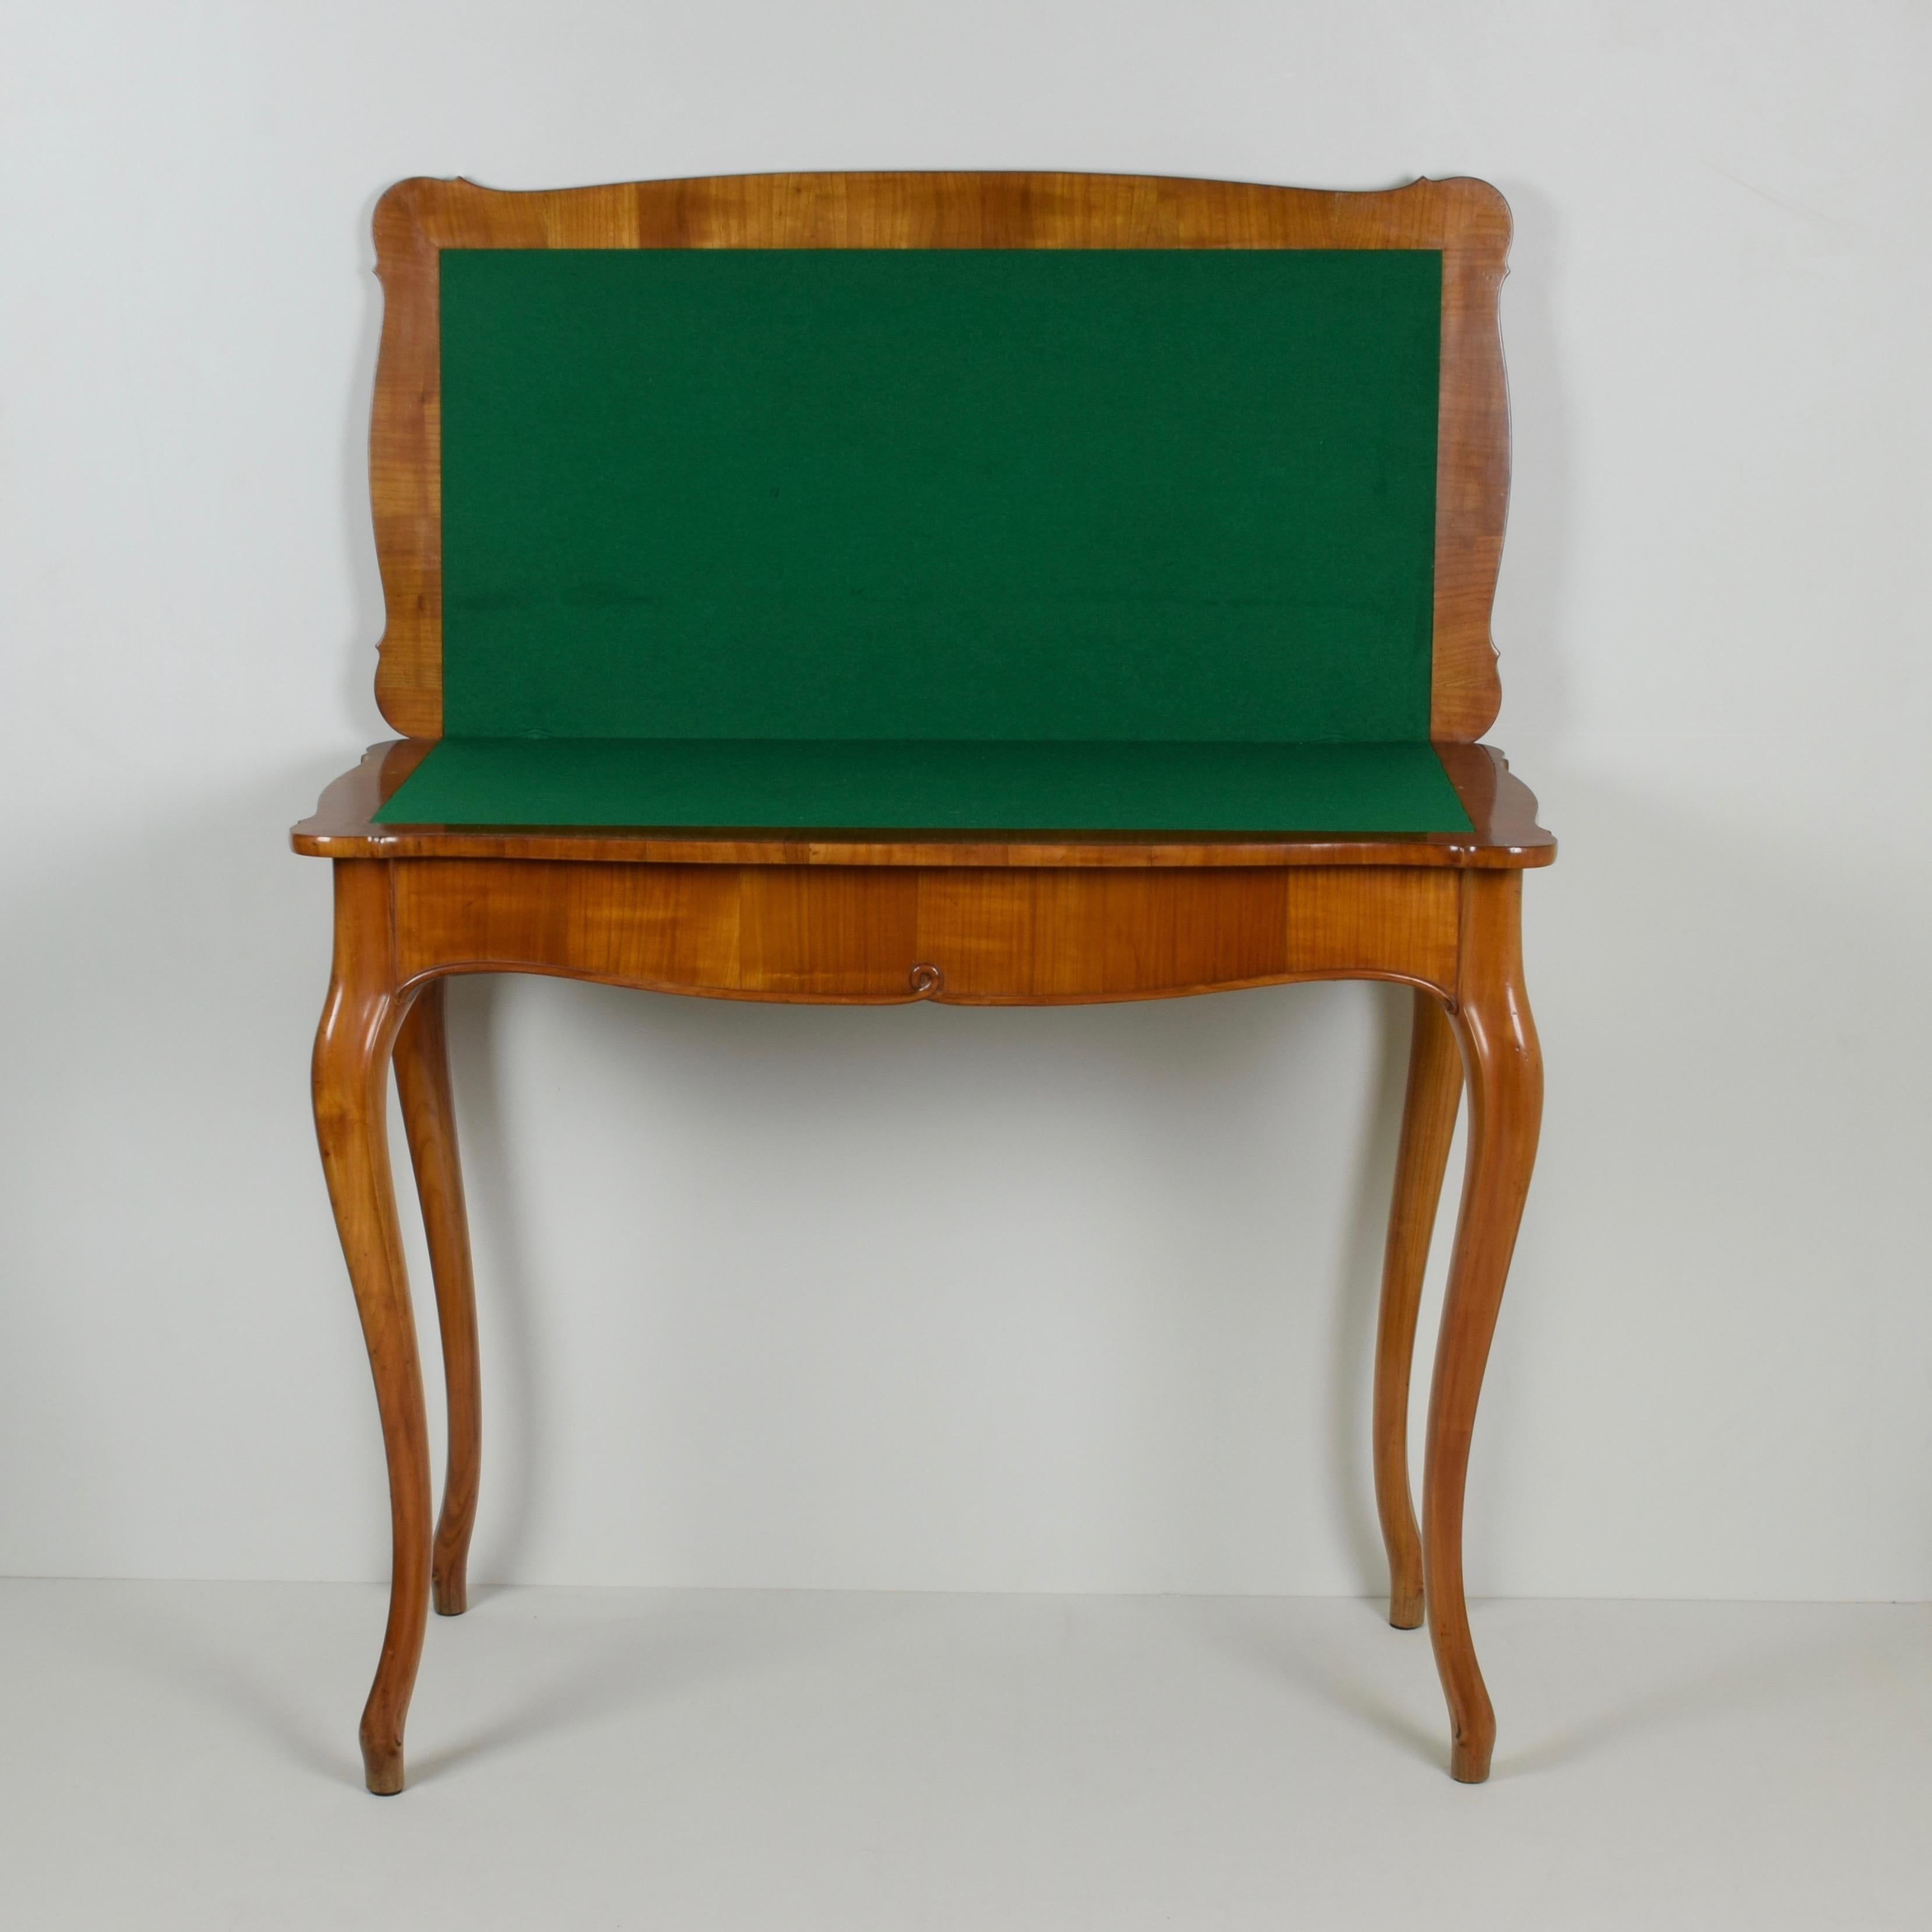 Italy, Veneto, mid-19th century
Veneered in cherry, legs in solid cherry
Playing surface in green cloth
Internal compartment under the top
Dimensions: W 94.5 x D 47 x H 77 cm.